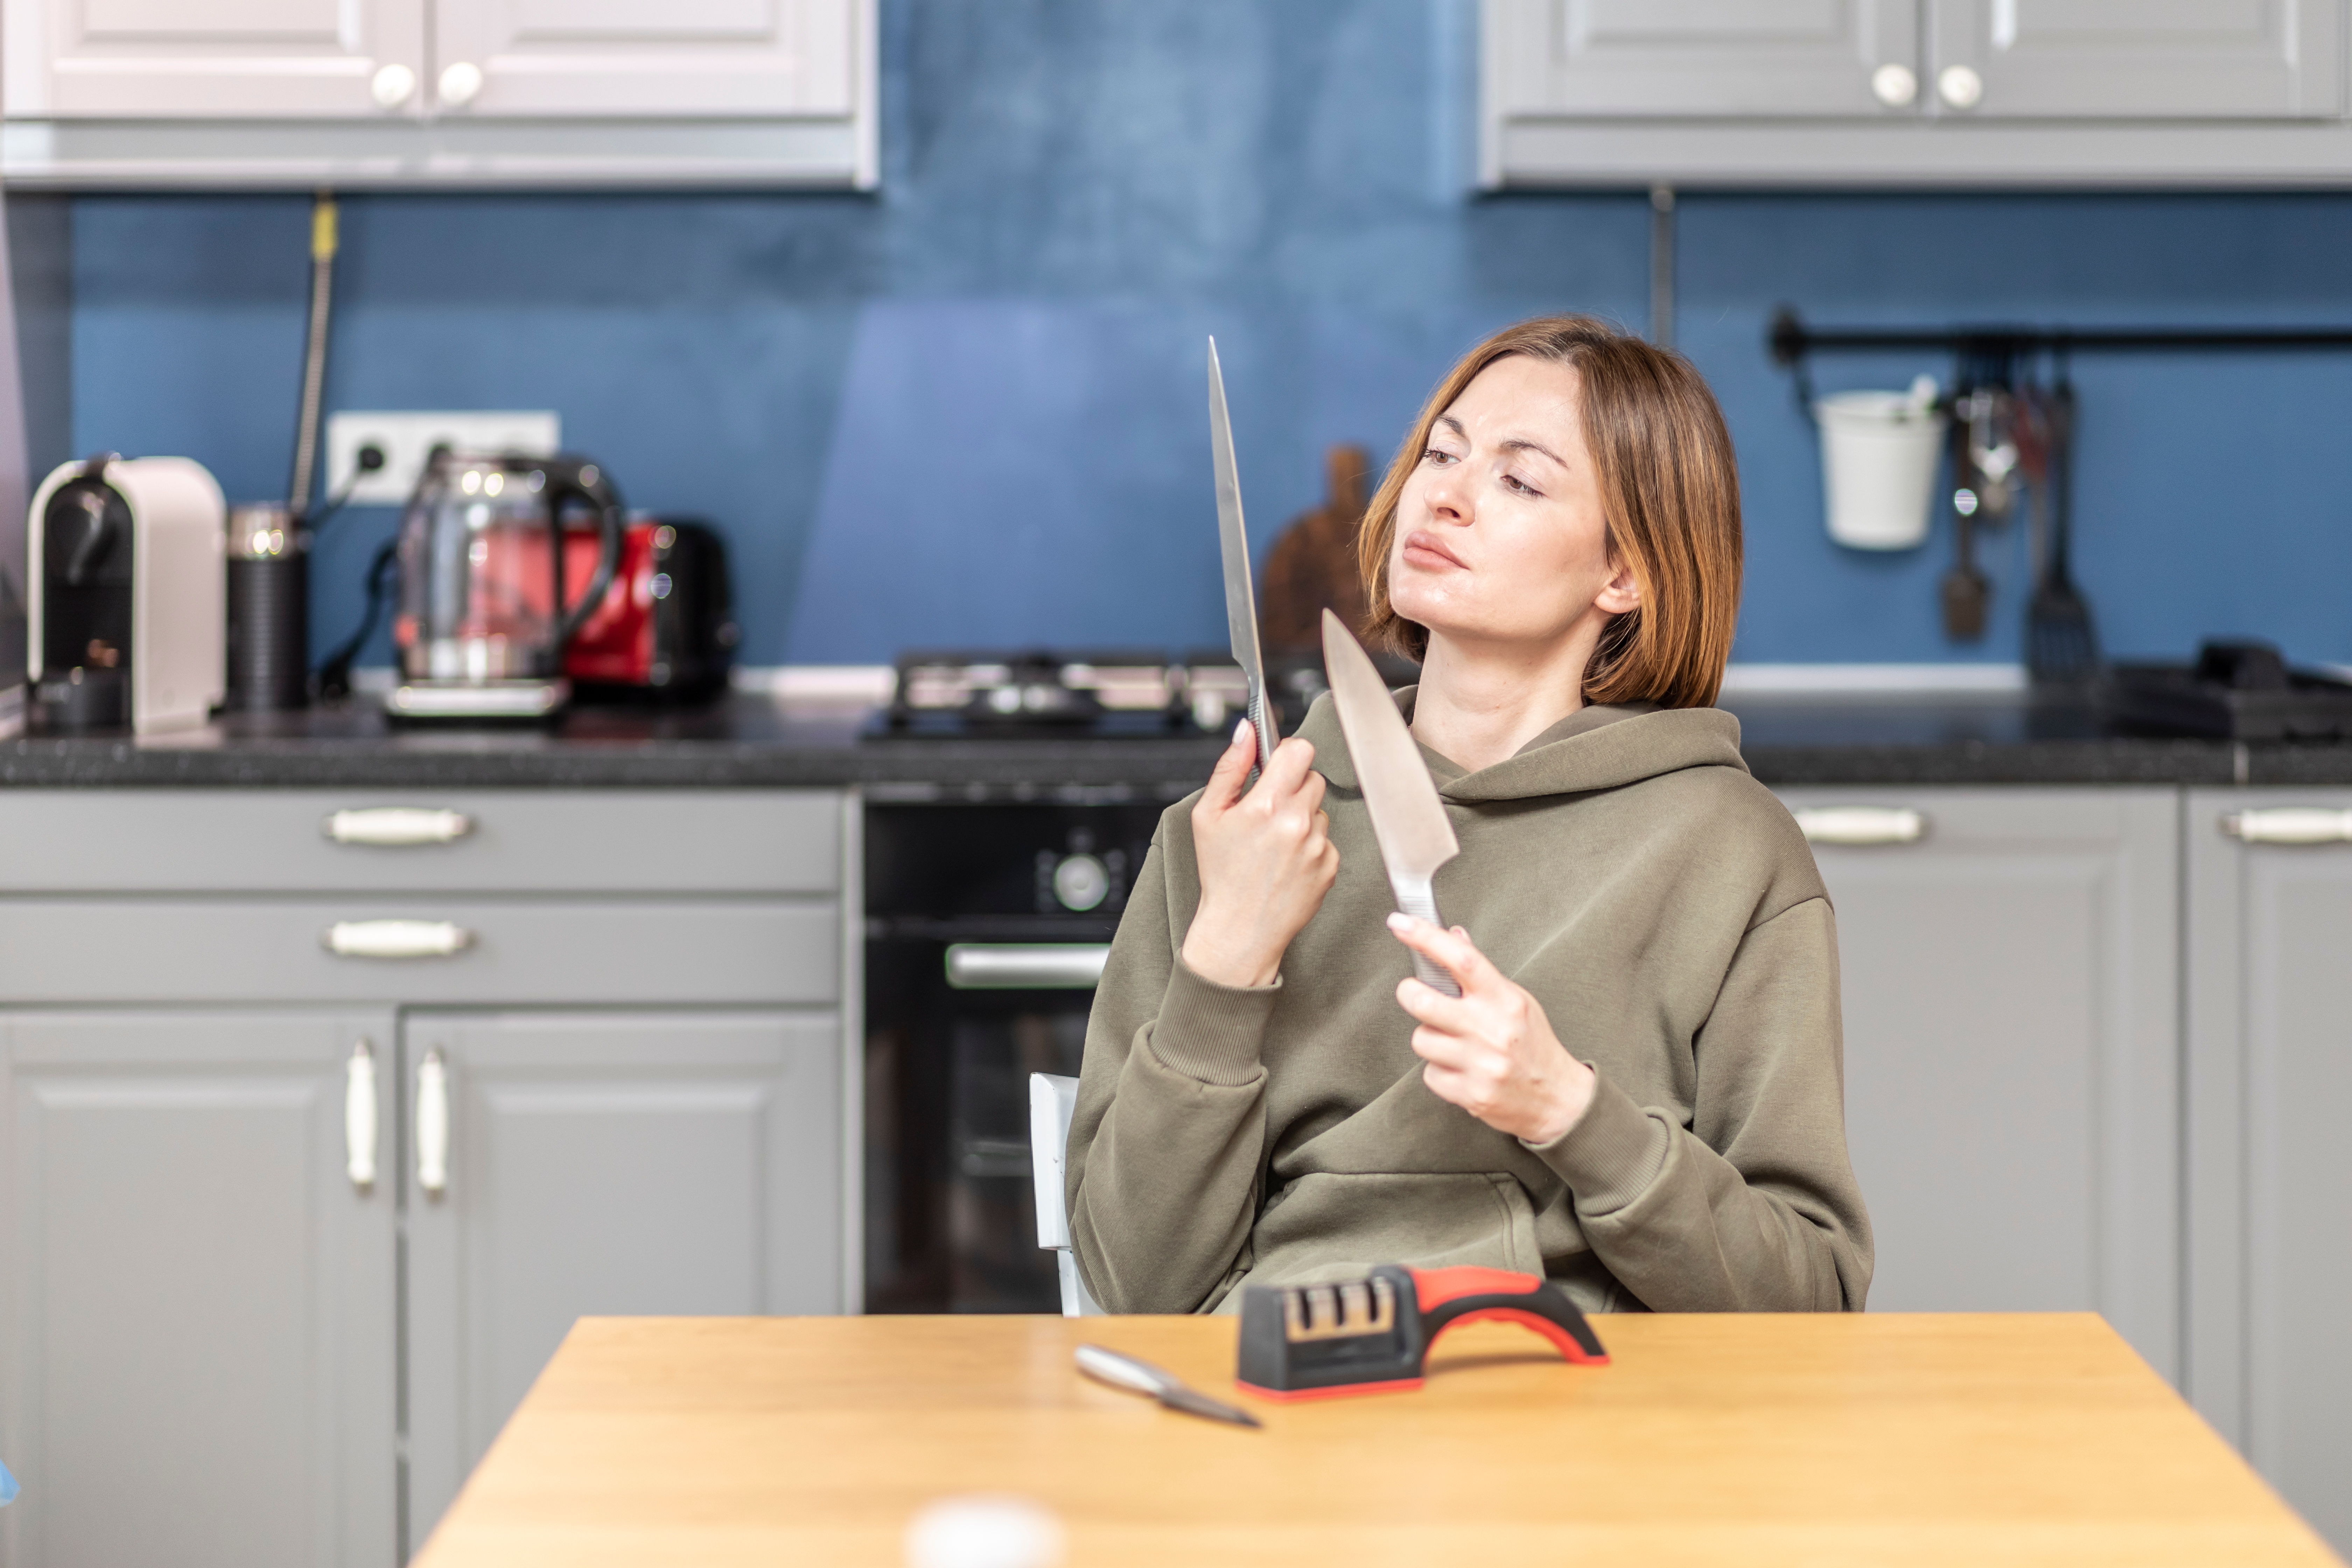 Woman sitting at table holding two kitchen knives in front of a knife sharpener